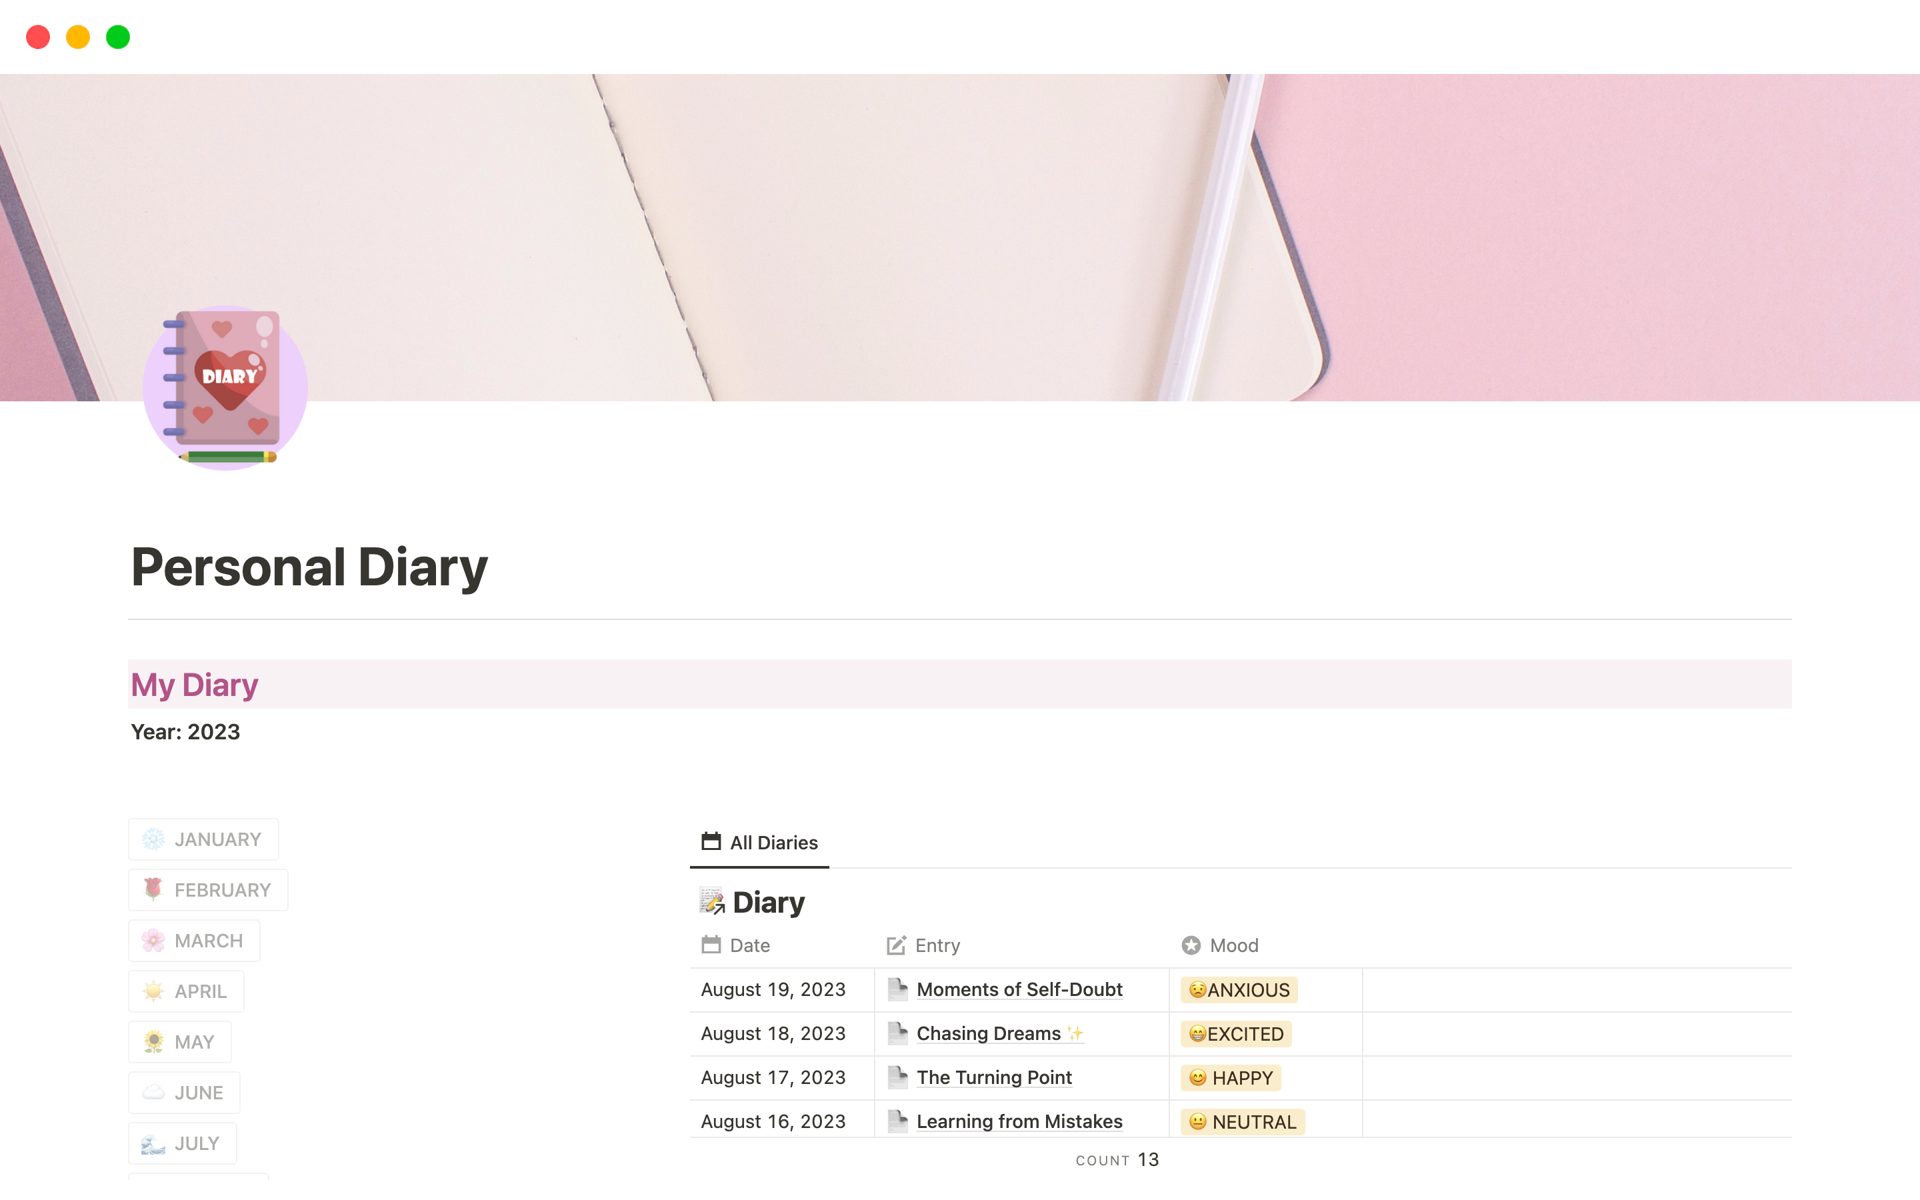 This Personal Diary Notion template allows you to keep track of your thoughts, experiences, or events throughout the year with quick access to your diary entries by month.